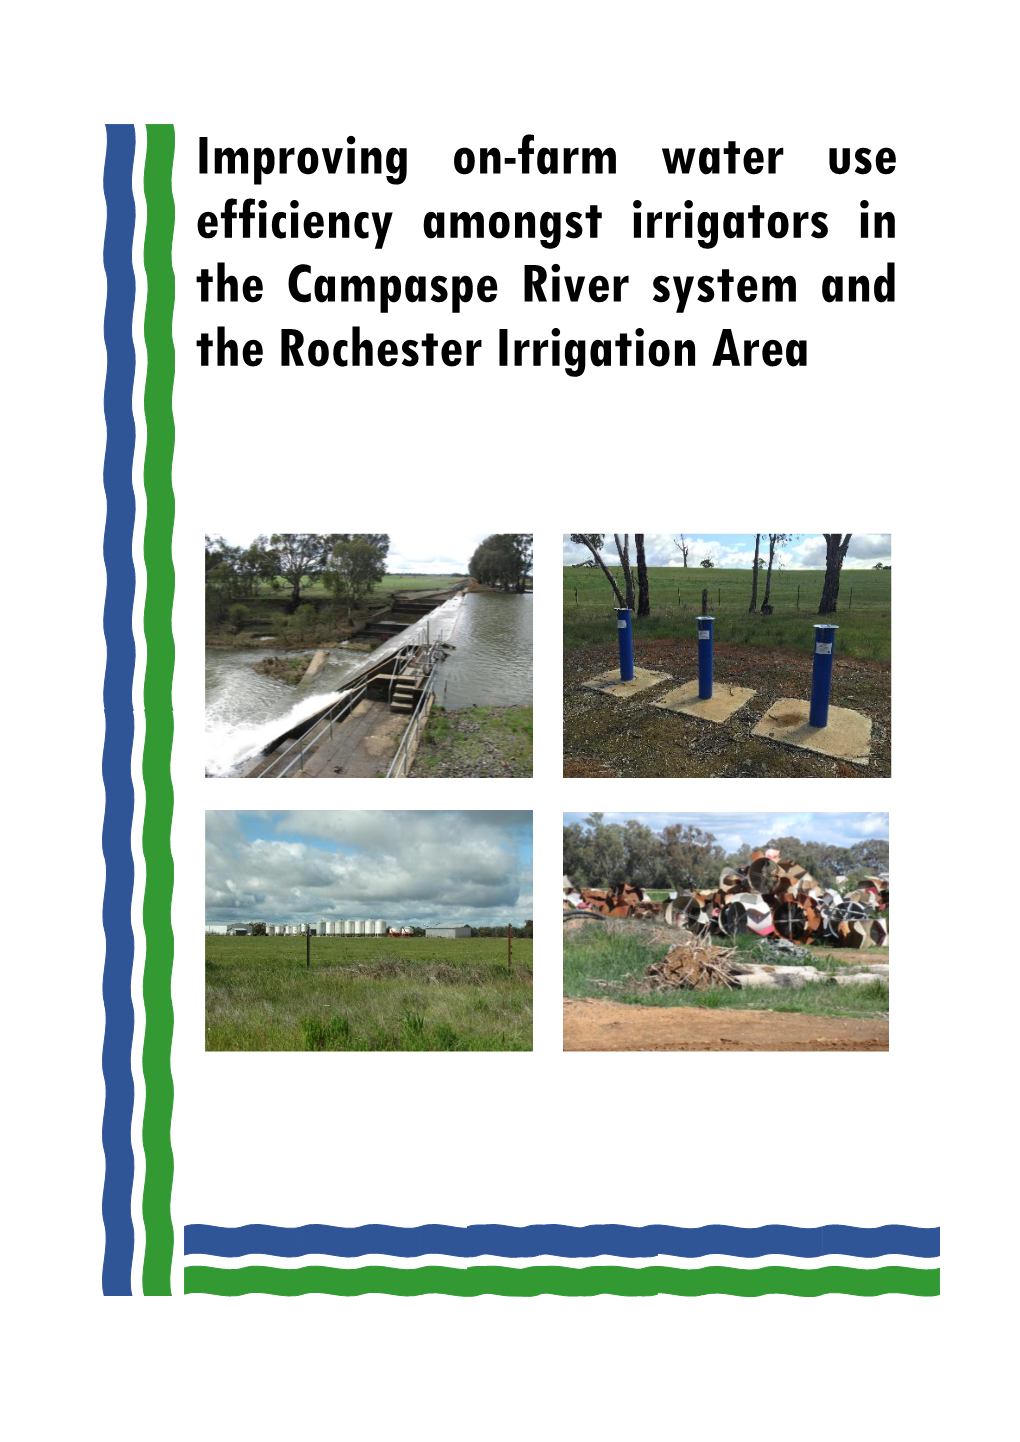 Improving On-Farm Water Use Efficiency Amongst Irrigators in the Campaspe River System and the Rochester Irrigation Area